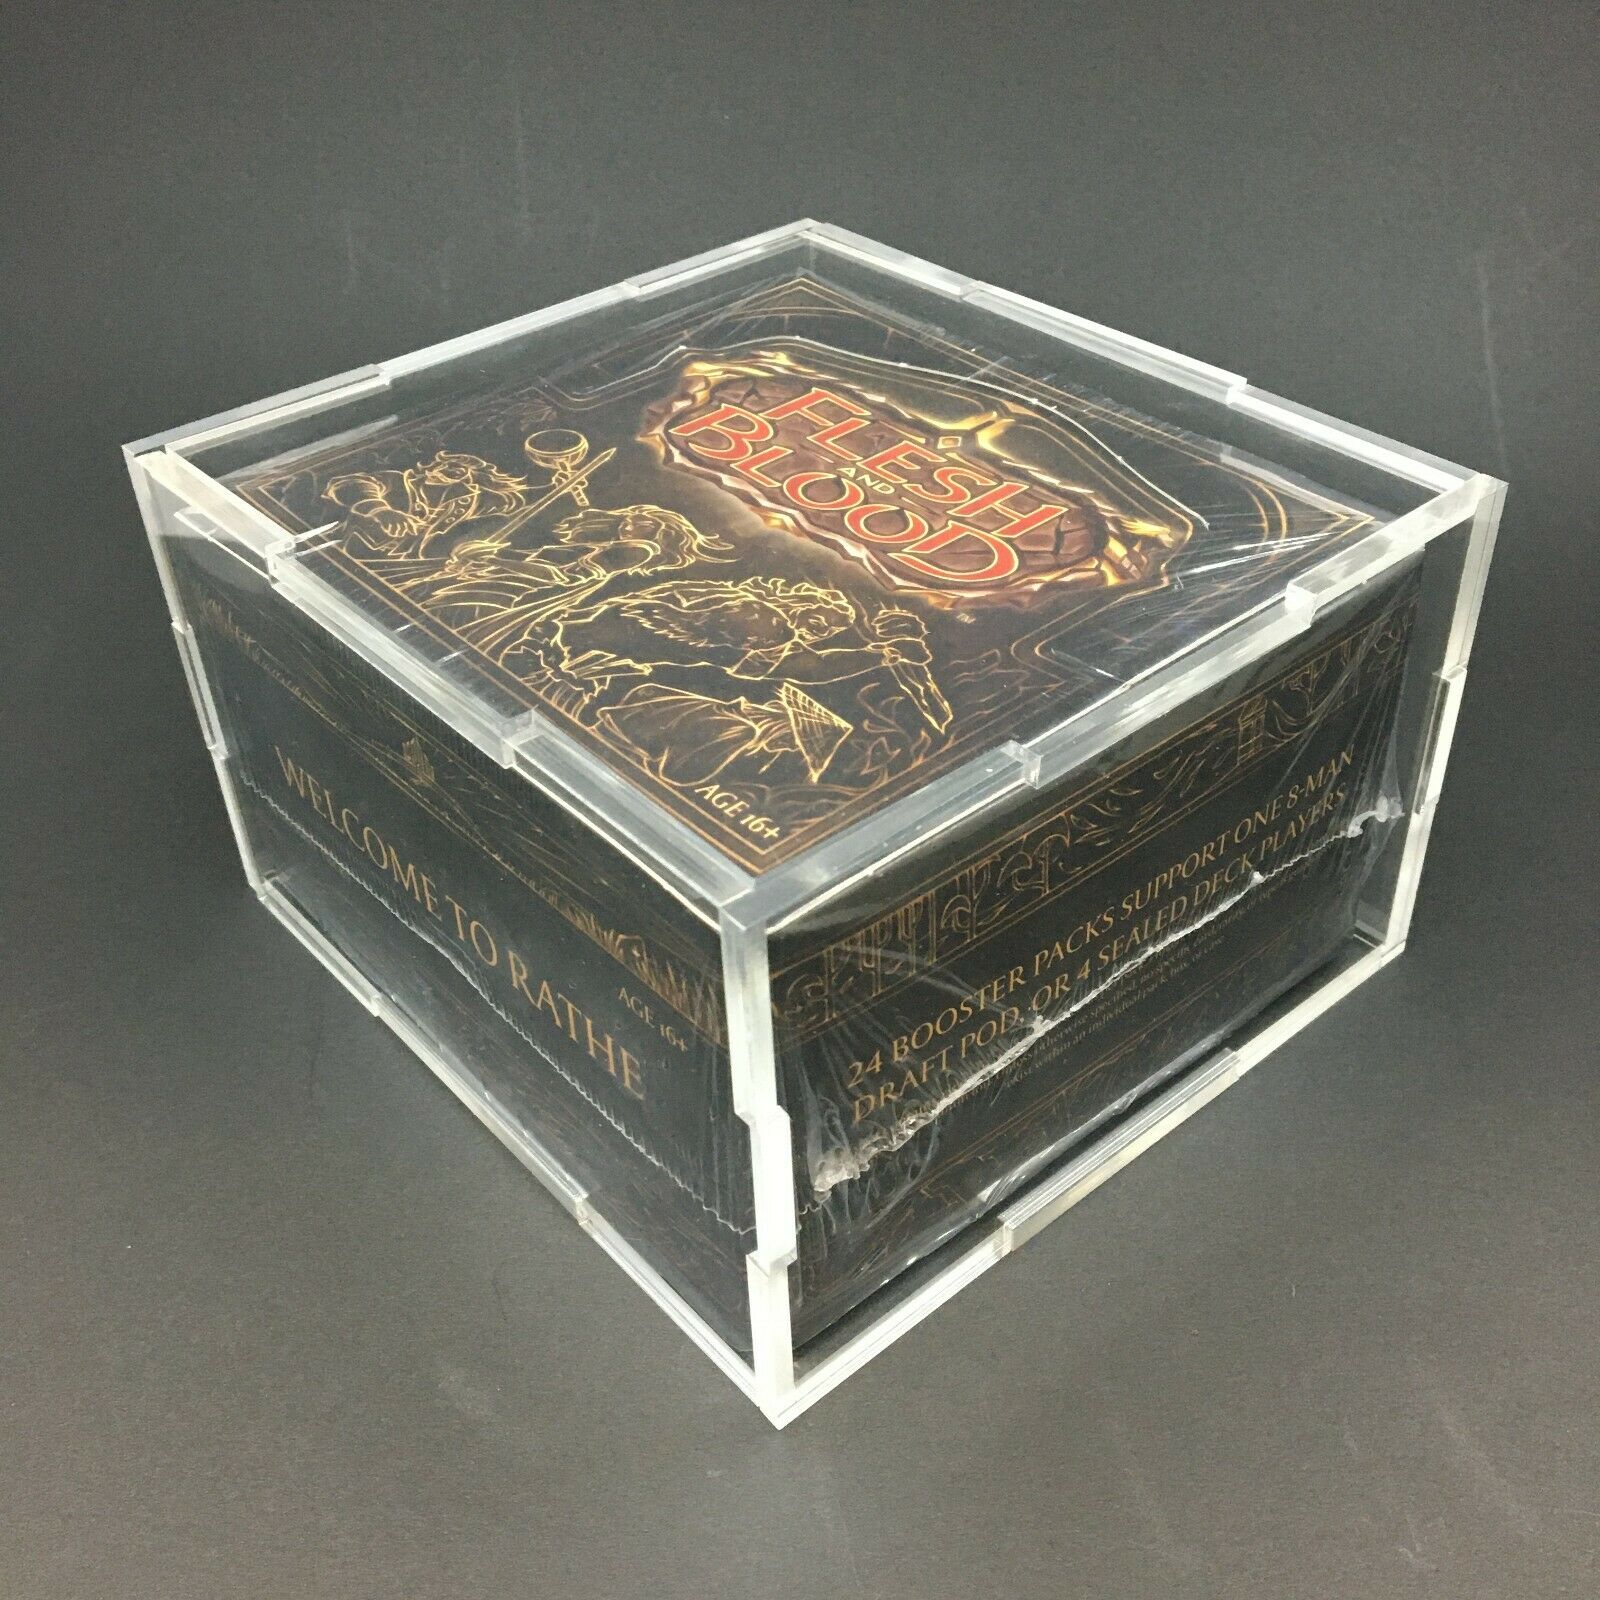 Flesh And Blood - Welcome To Rathe - Booster Box Display Case